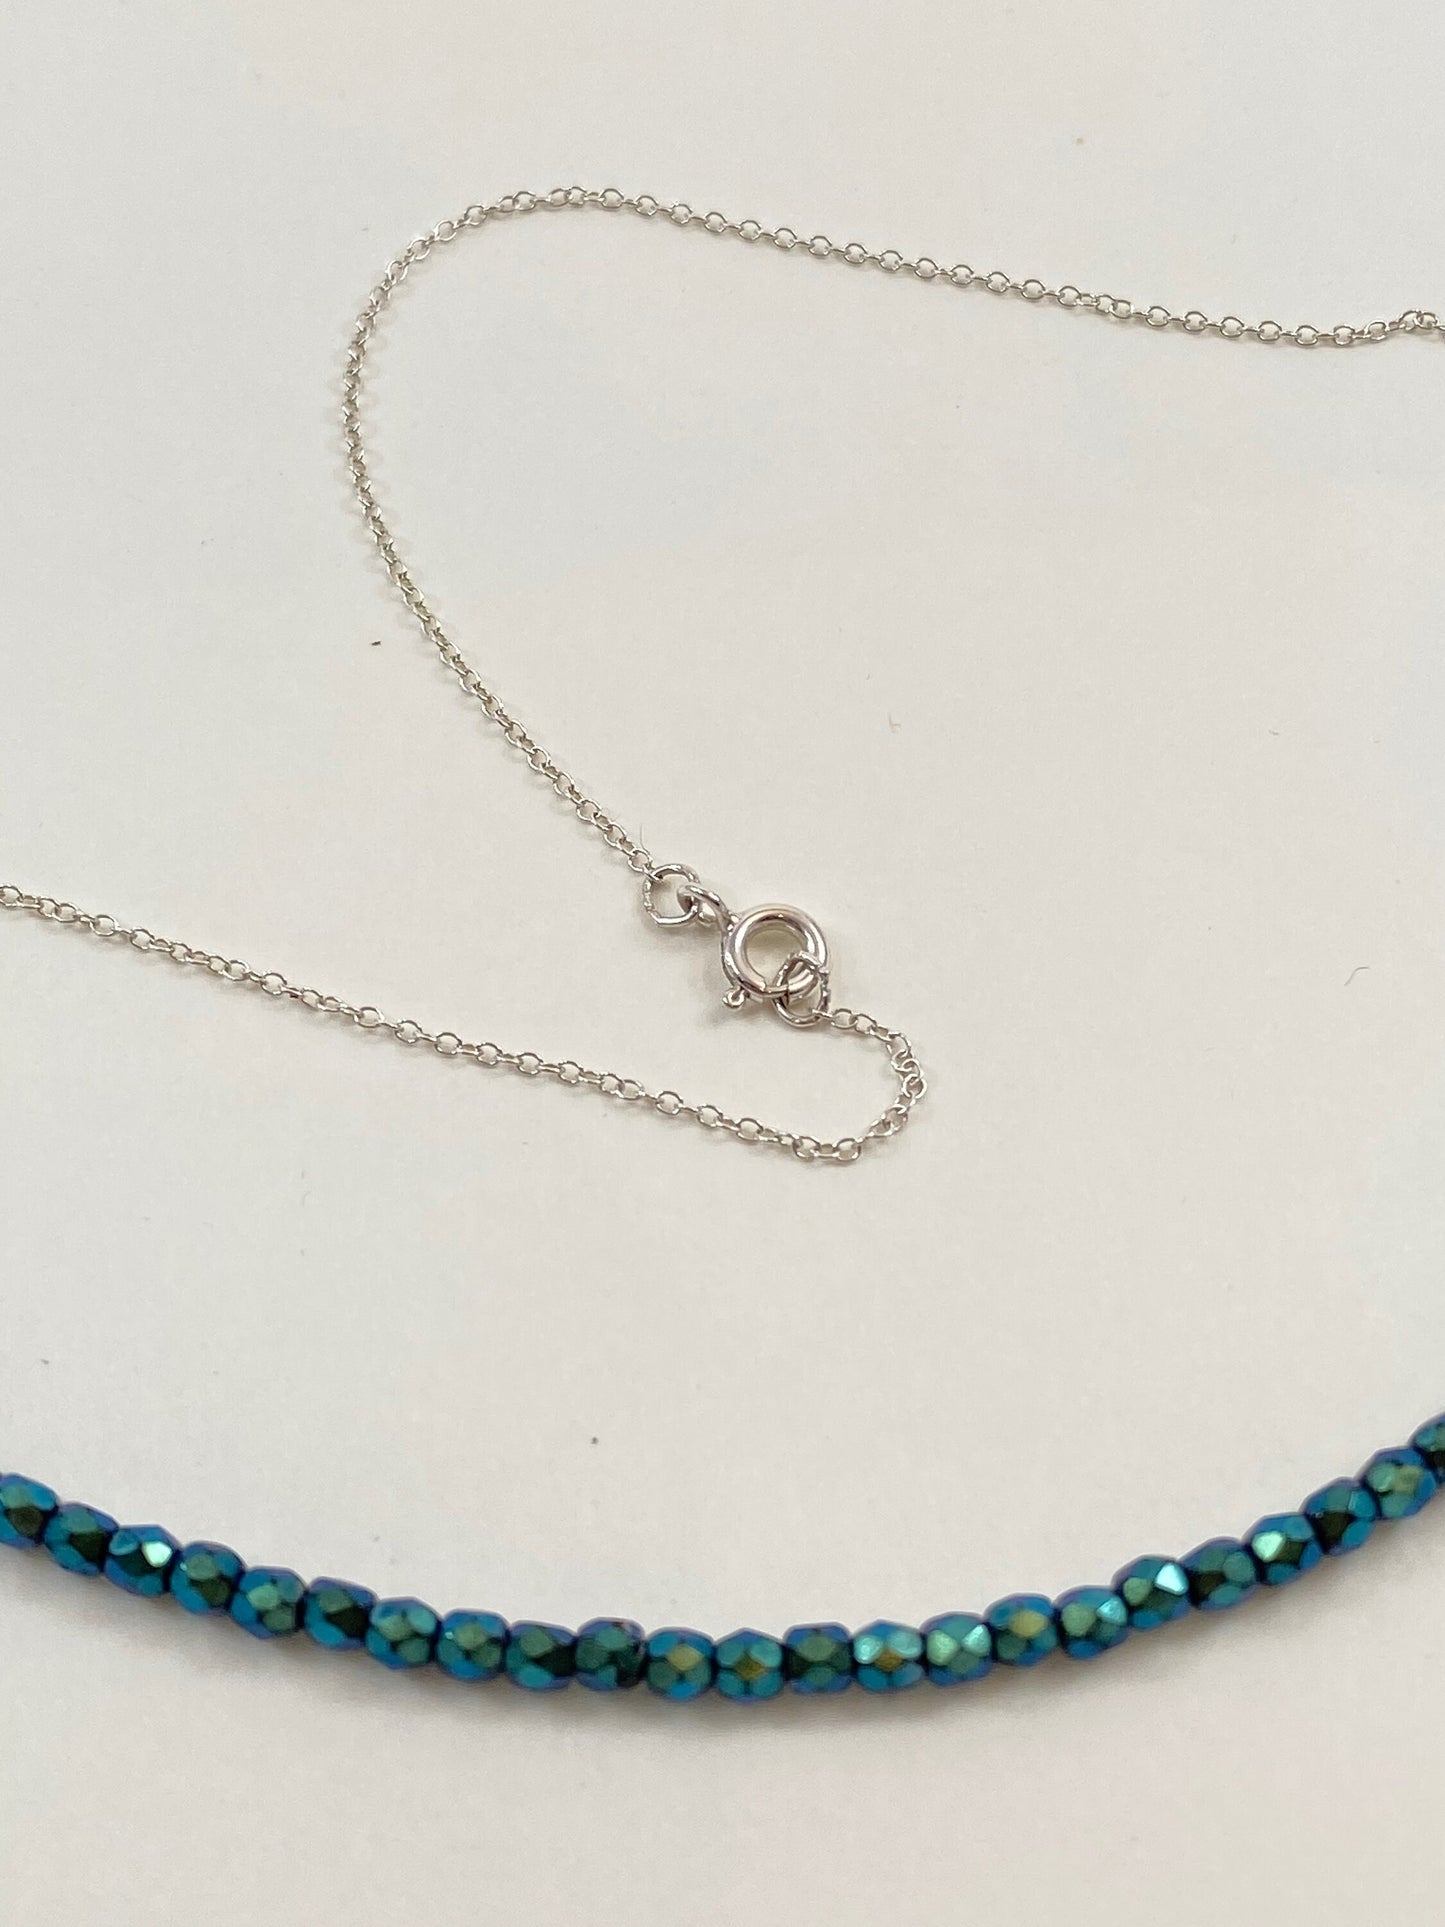 Teal green crystal and sterling silver choker necklace.